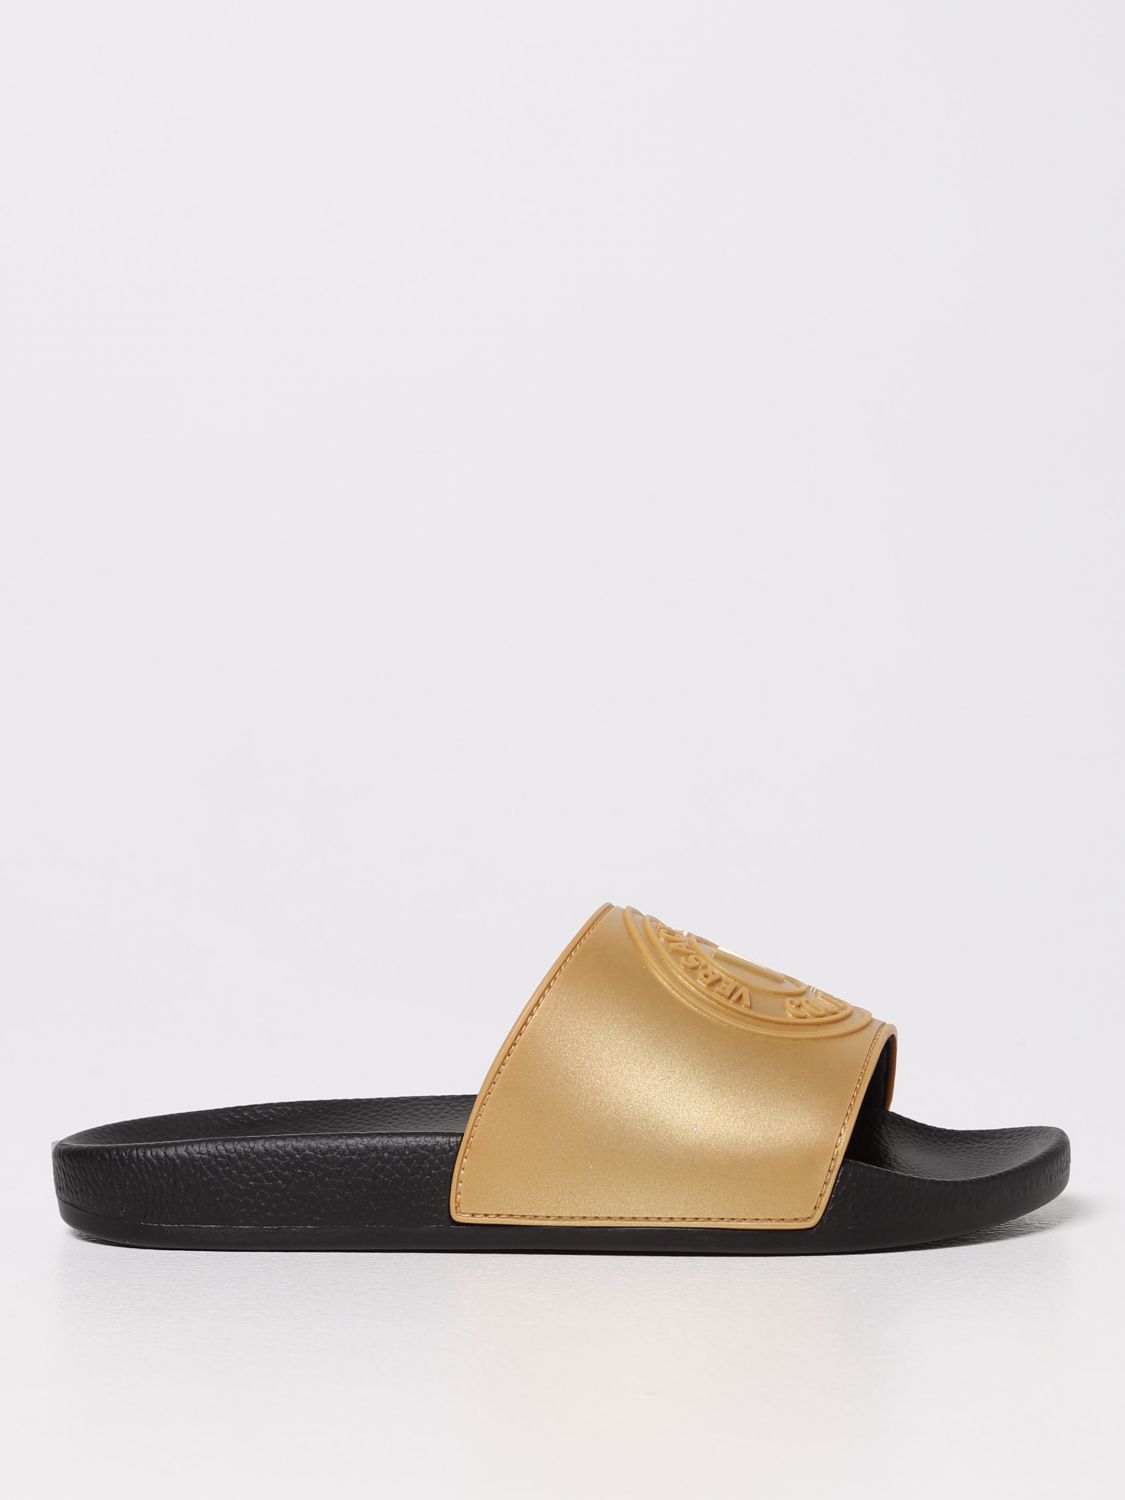 VERSACE JEANS COUTURE: slipper sandals with logo - Gold | Versace Jeans